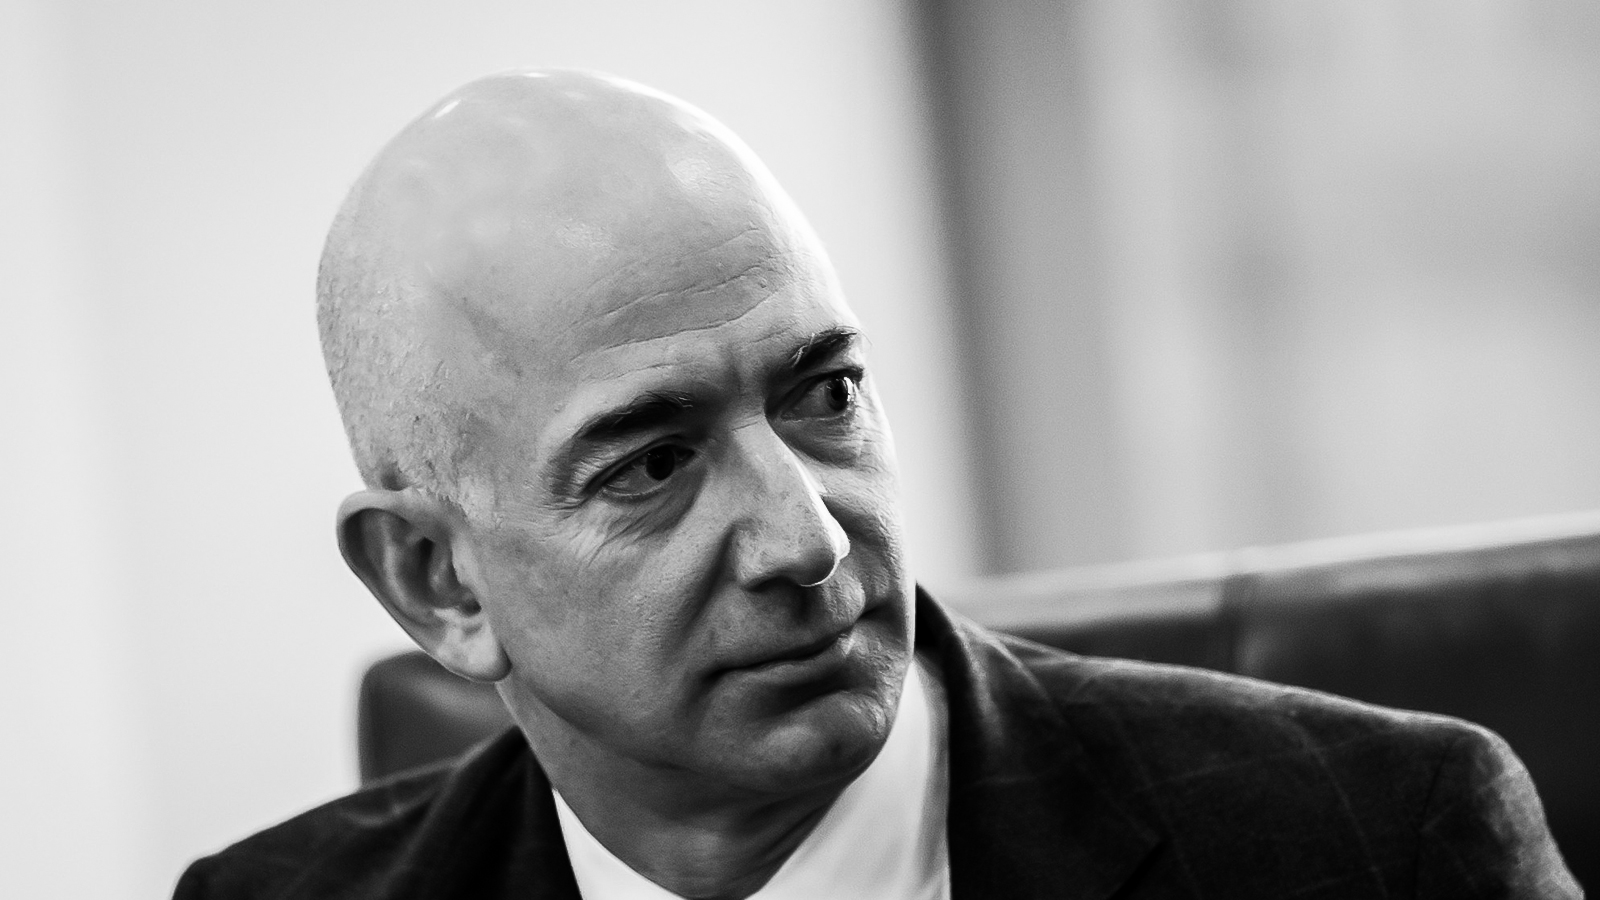 What jeff bezos values the most might surprise you